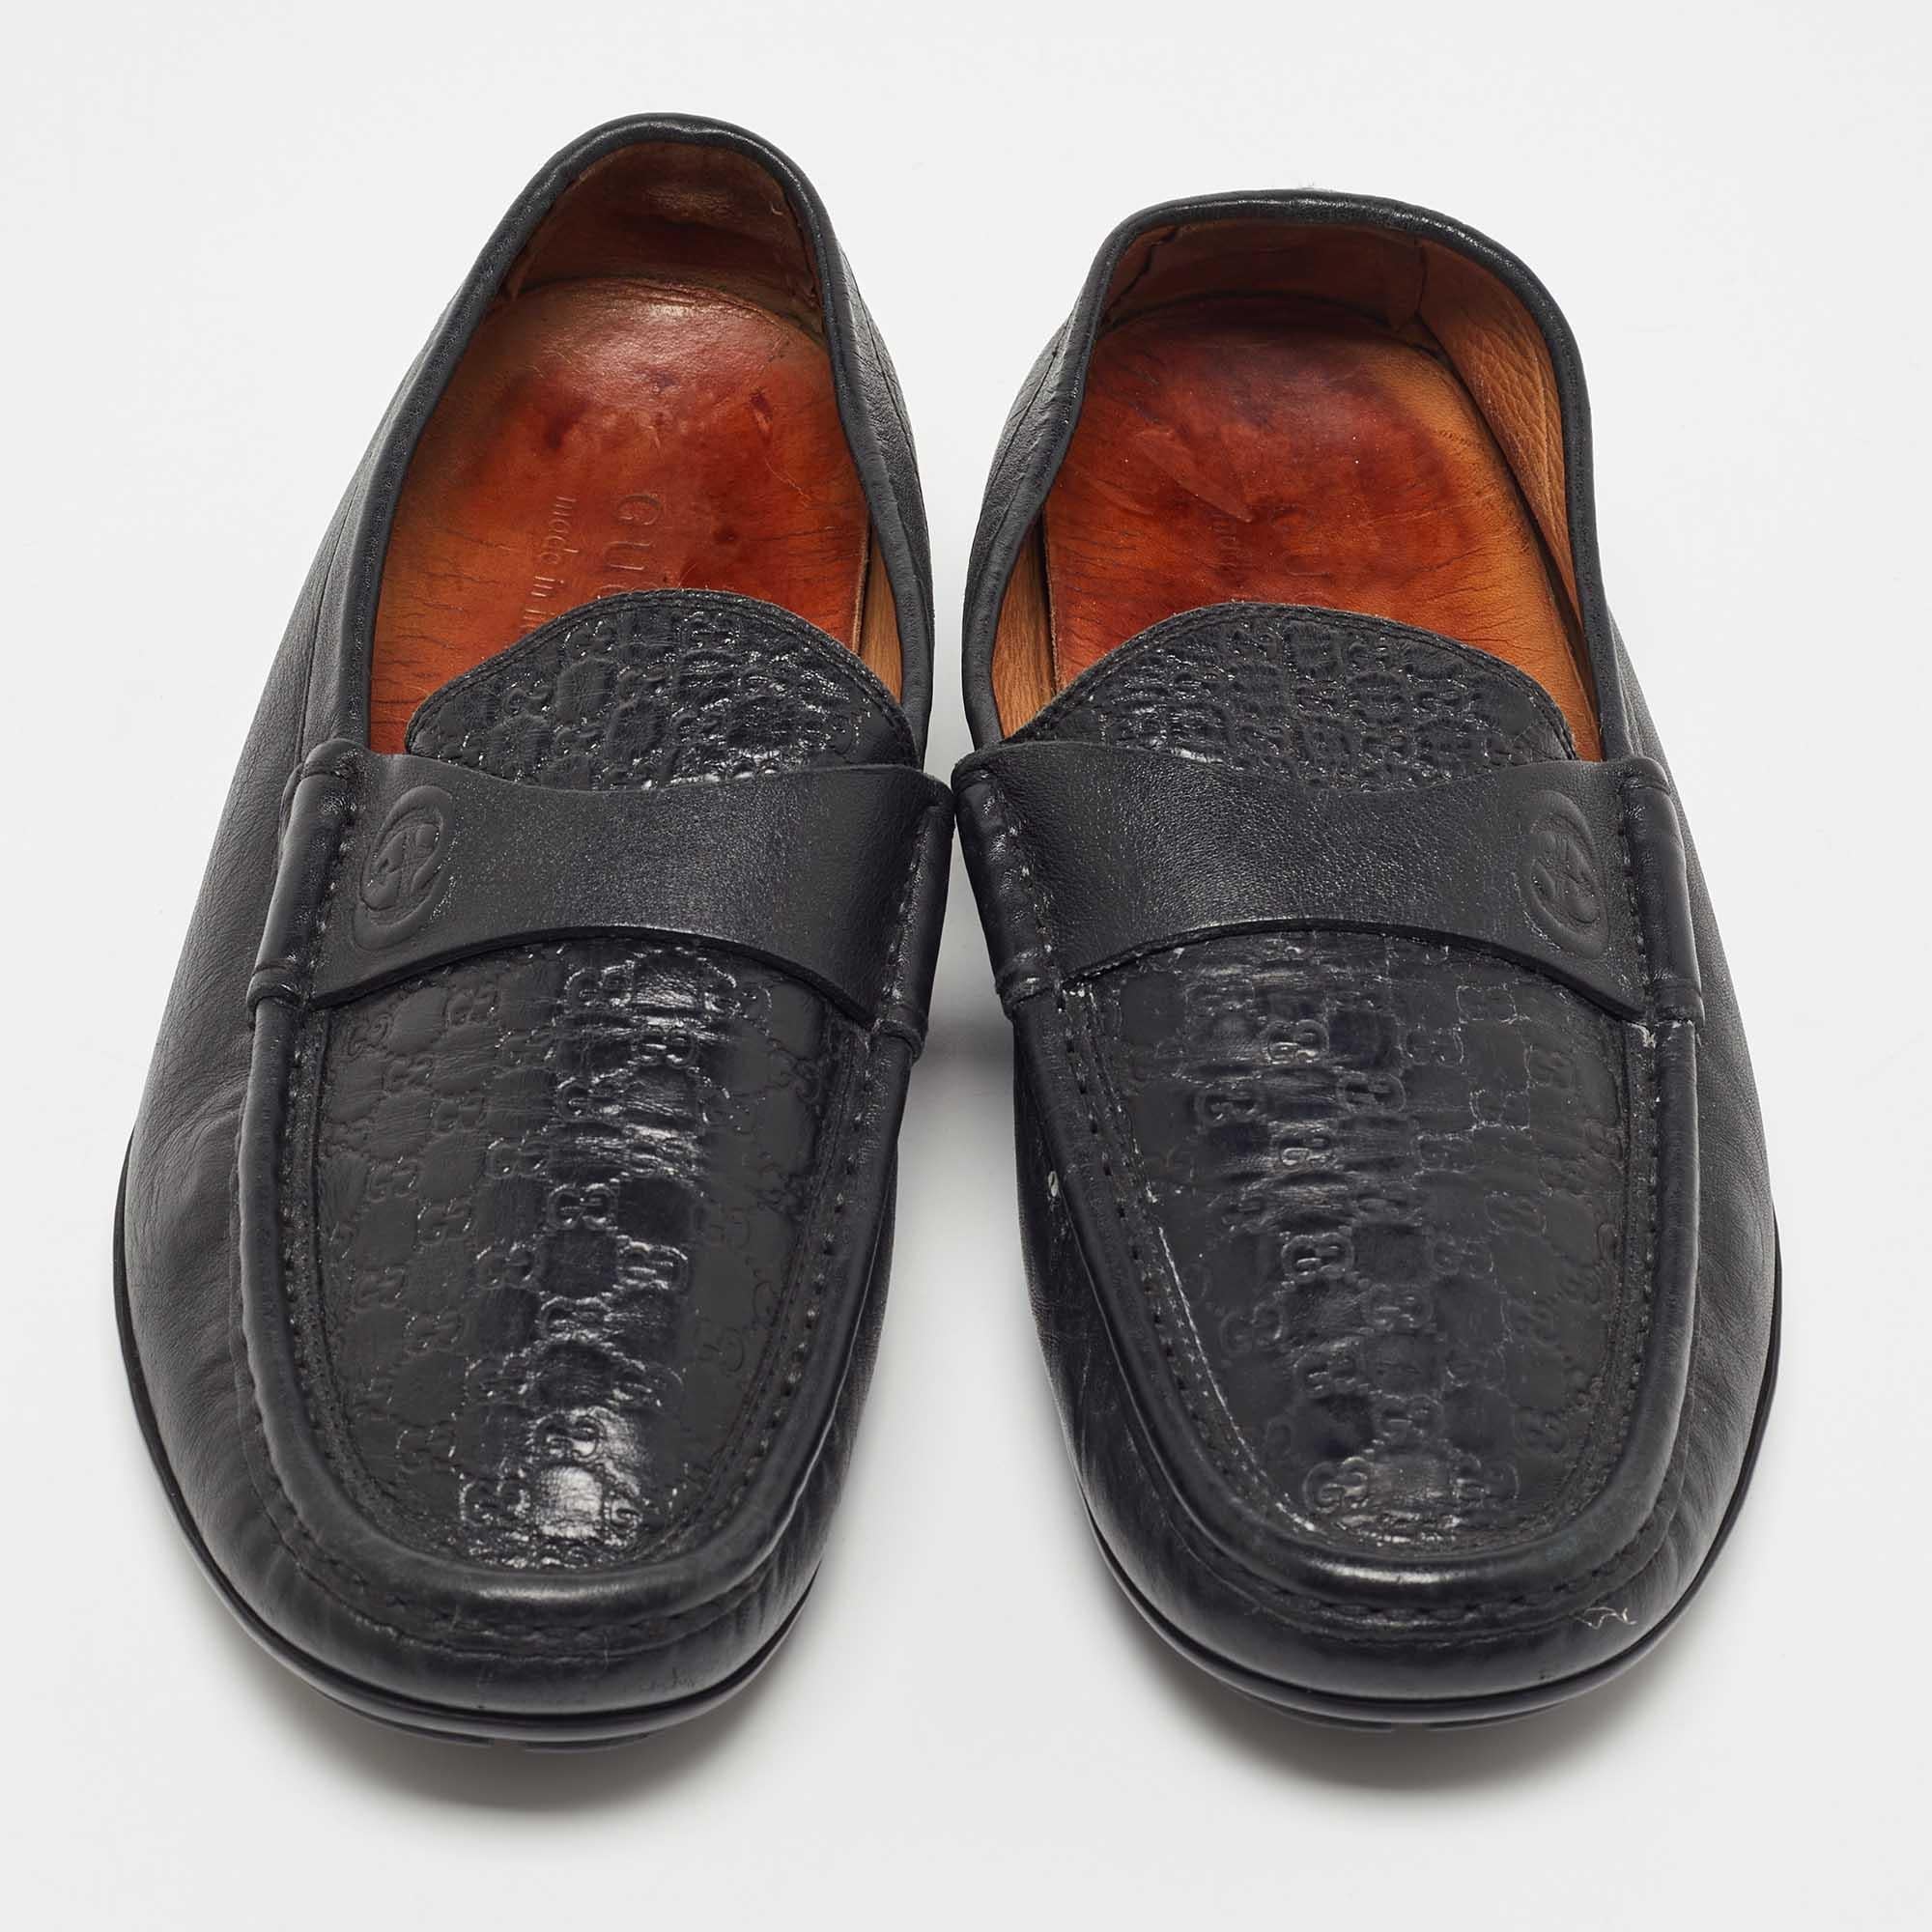 Practical, fashionable, and durable—these Gucci loafers are carefully built to be fine companions to your everyday style. They come made using the best materials to be a prized buy.

